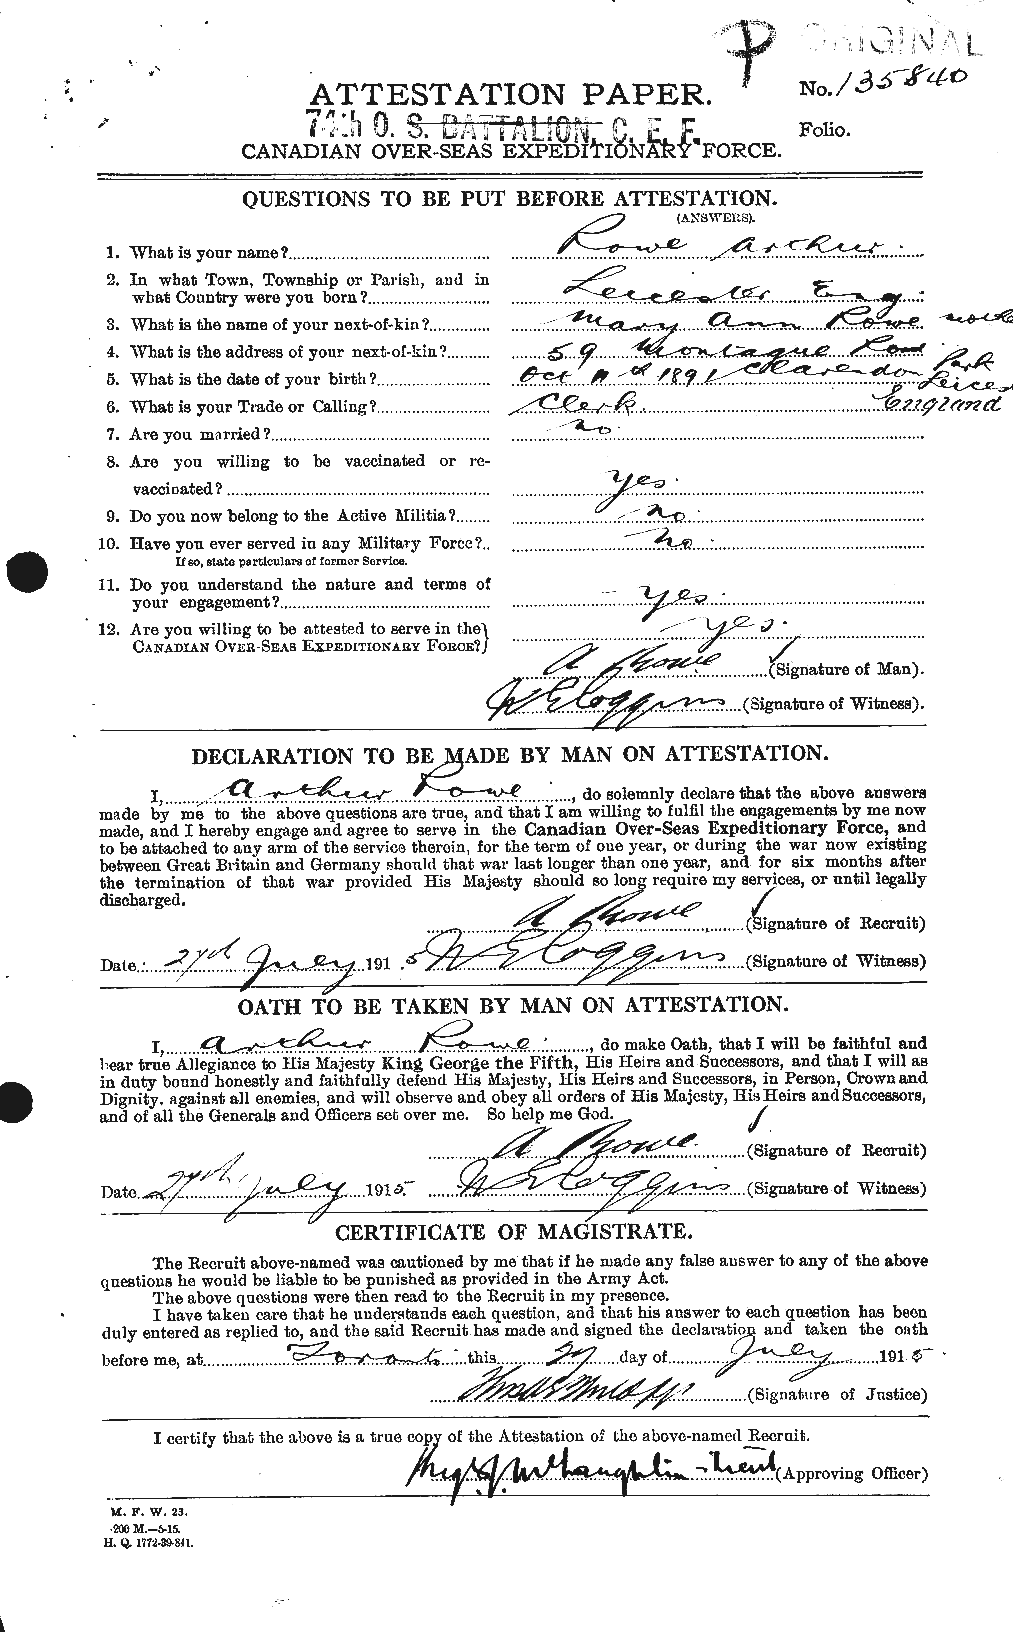 Personnel Records of the First World War - CEF 615794a